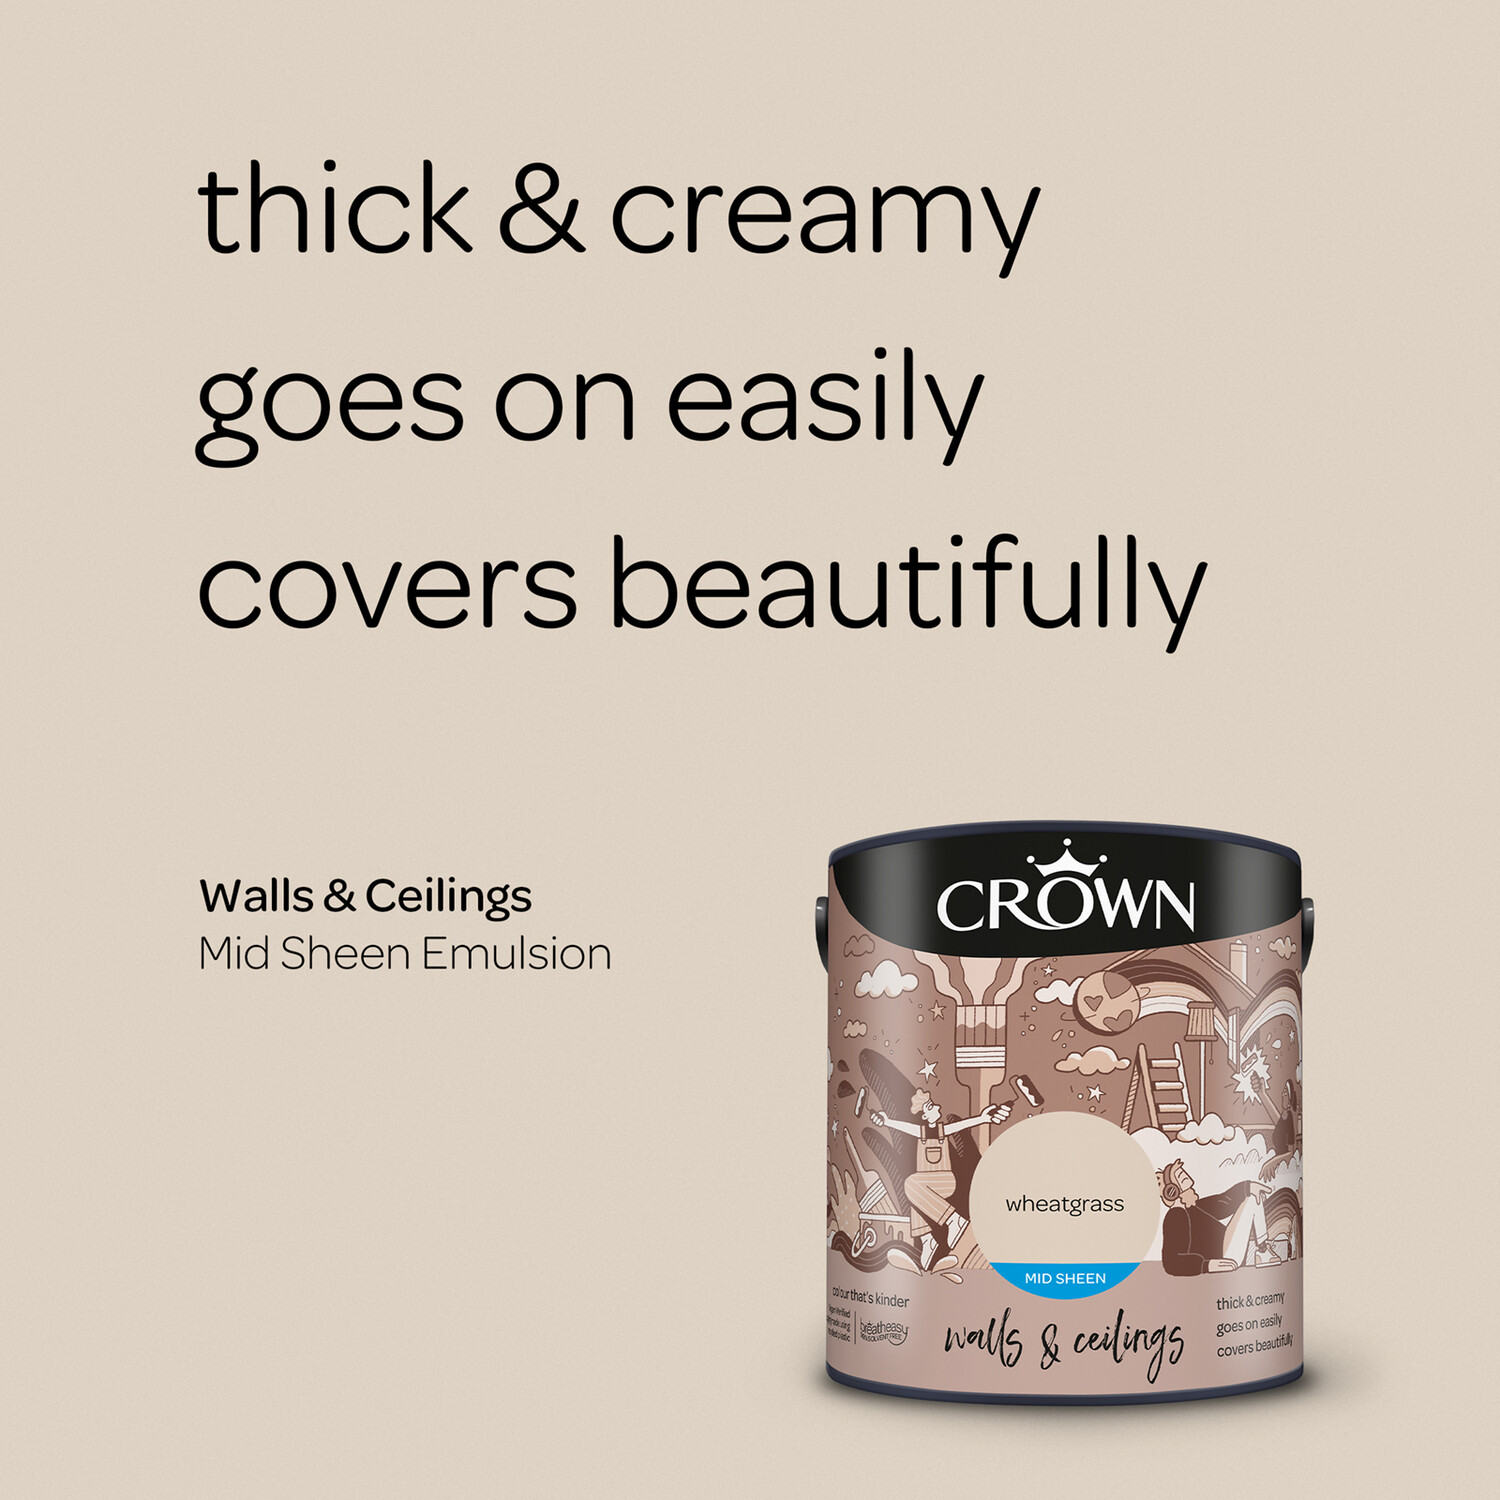 Crown Walls & Ceilings Wheatgrass Mid Sheen Emulsion Paint 2.5L Image 8